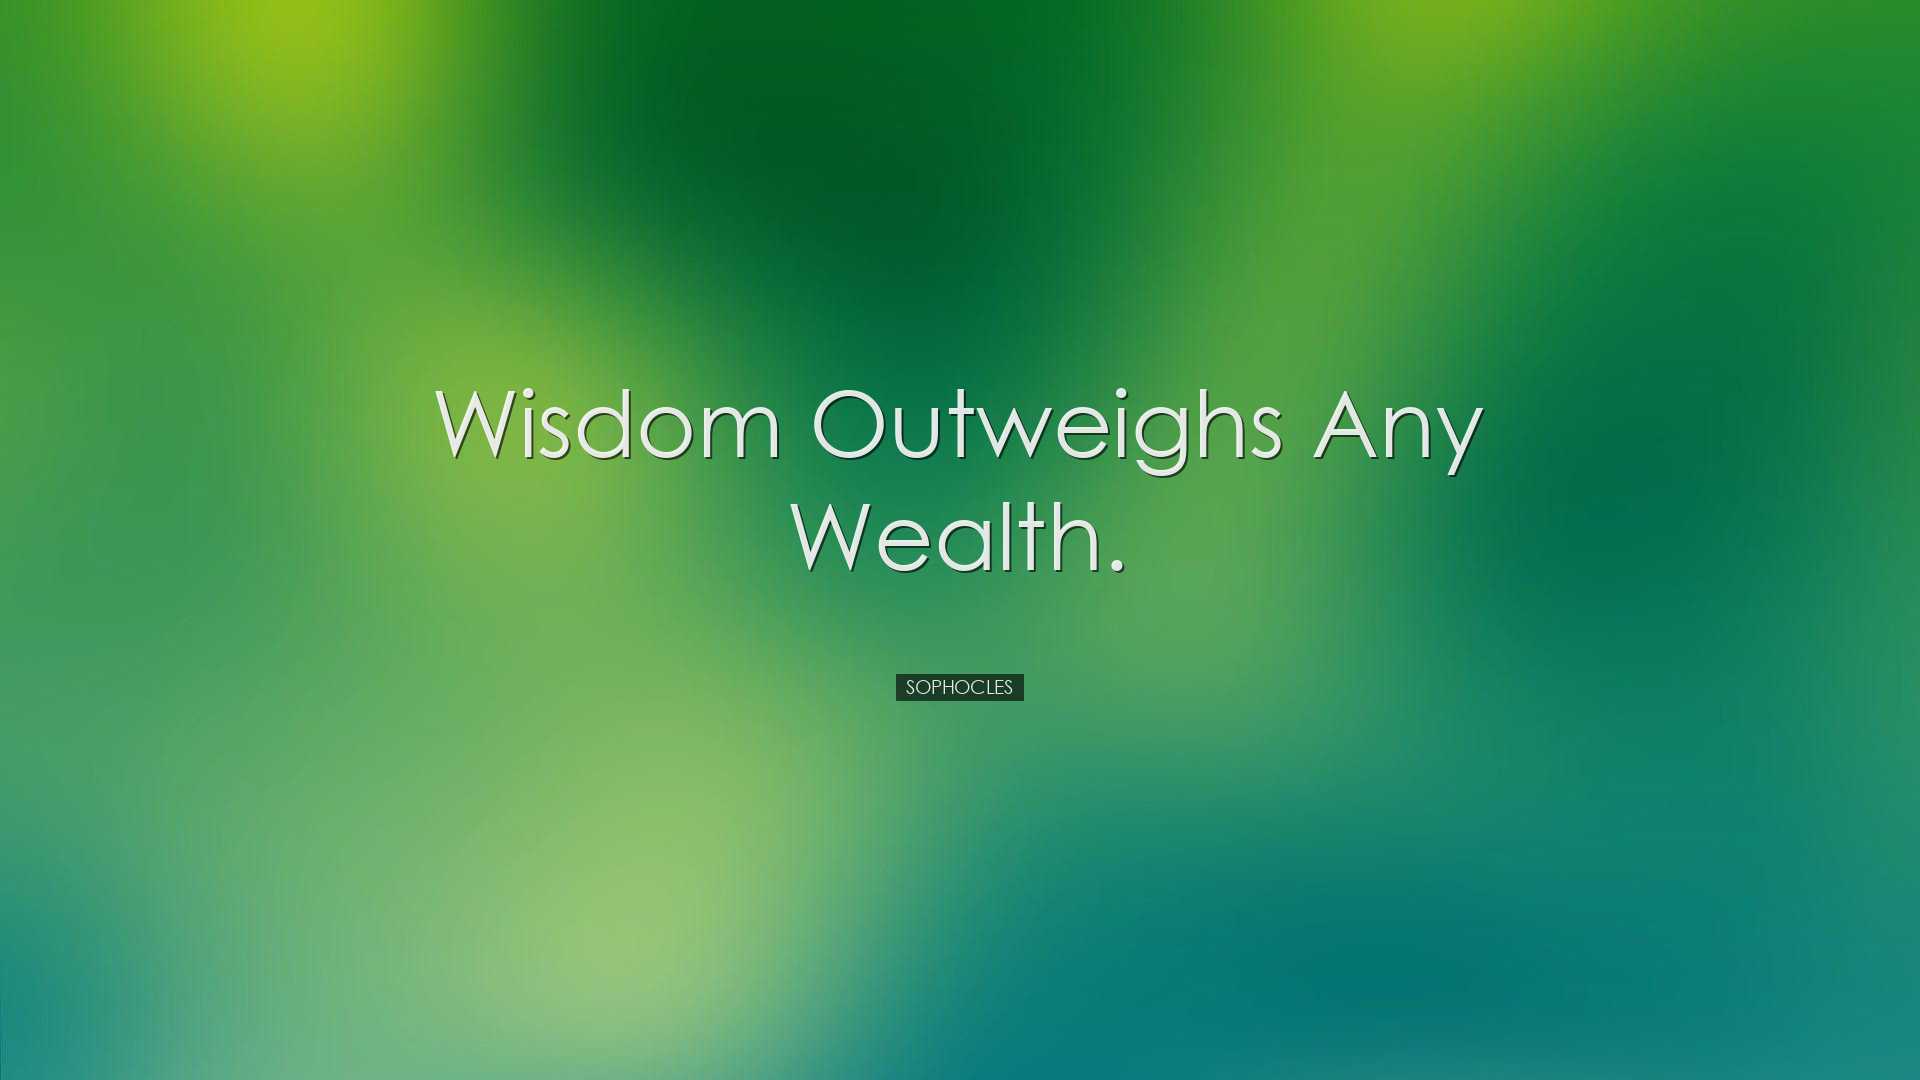 Wisdom outweighs any wealth. - Sophocles